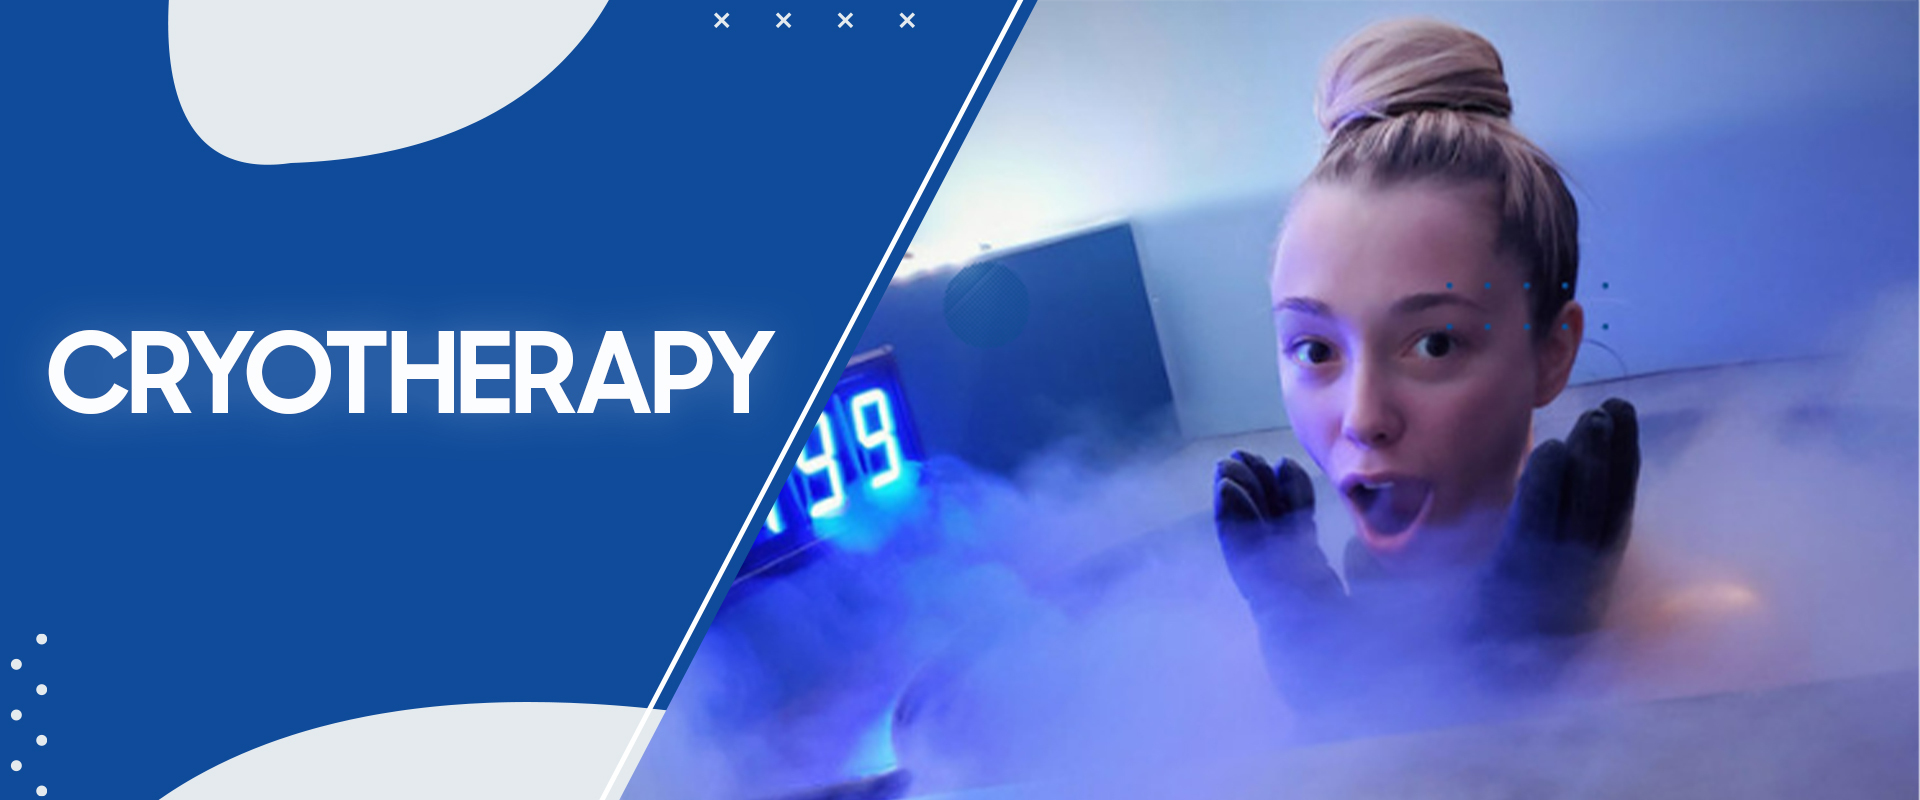 CRYOTHERAPY - Studio Recovery